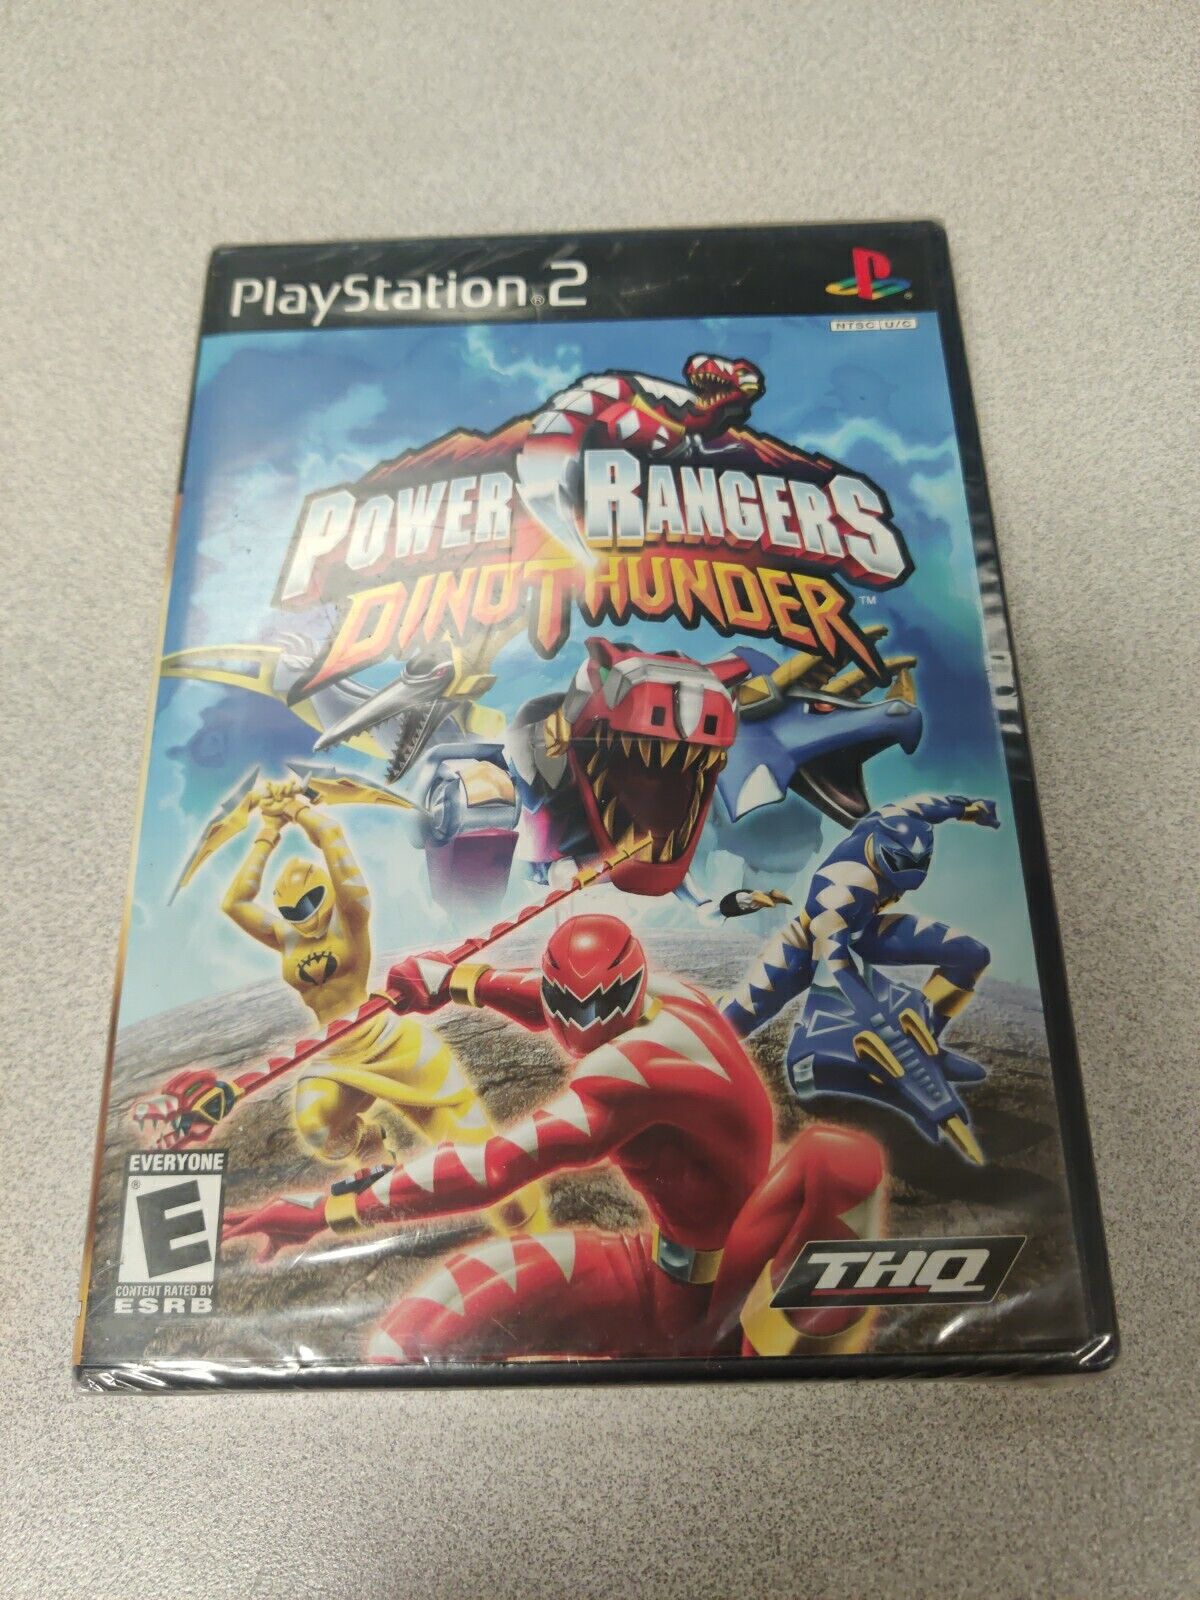 Awesome Power Rangers: Dino Thunder Sony PlayStation 2 2004 Brand New Factory Sealed PS2 on eBay